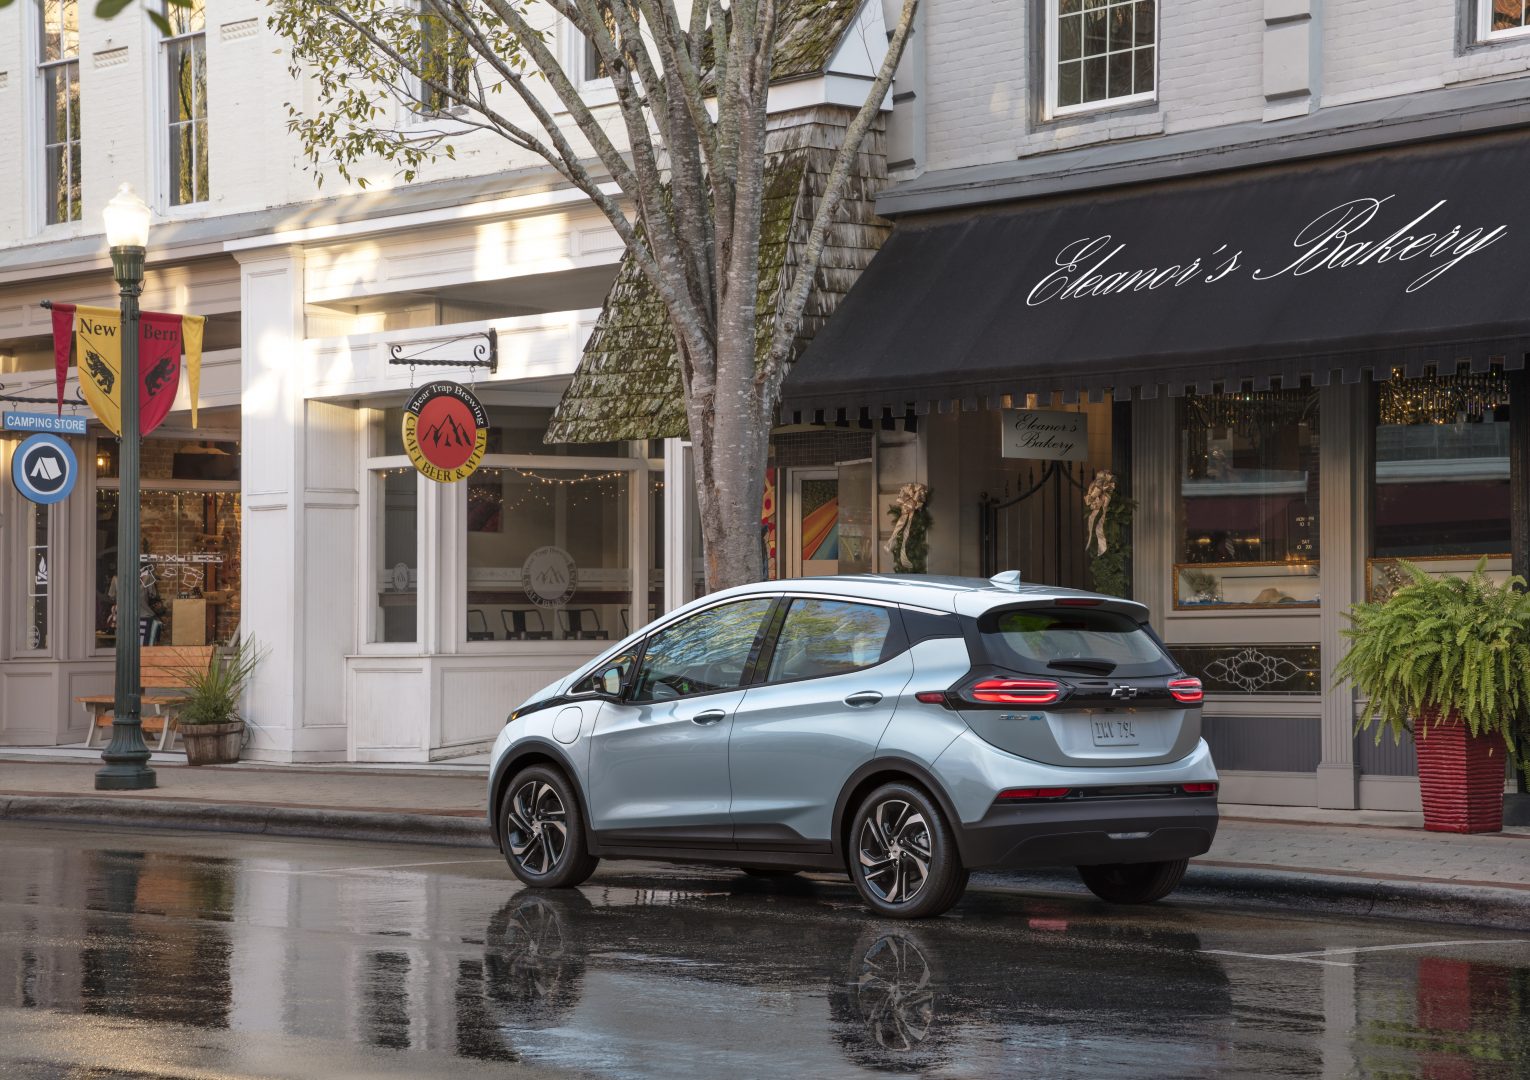 The all-new 2022 Chevy Bolt is an affordable and reliable electric vehicle